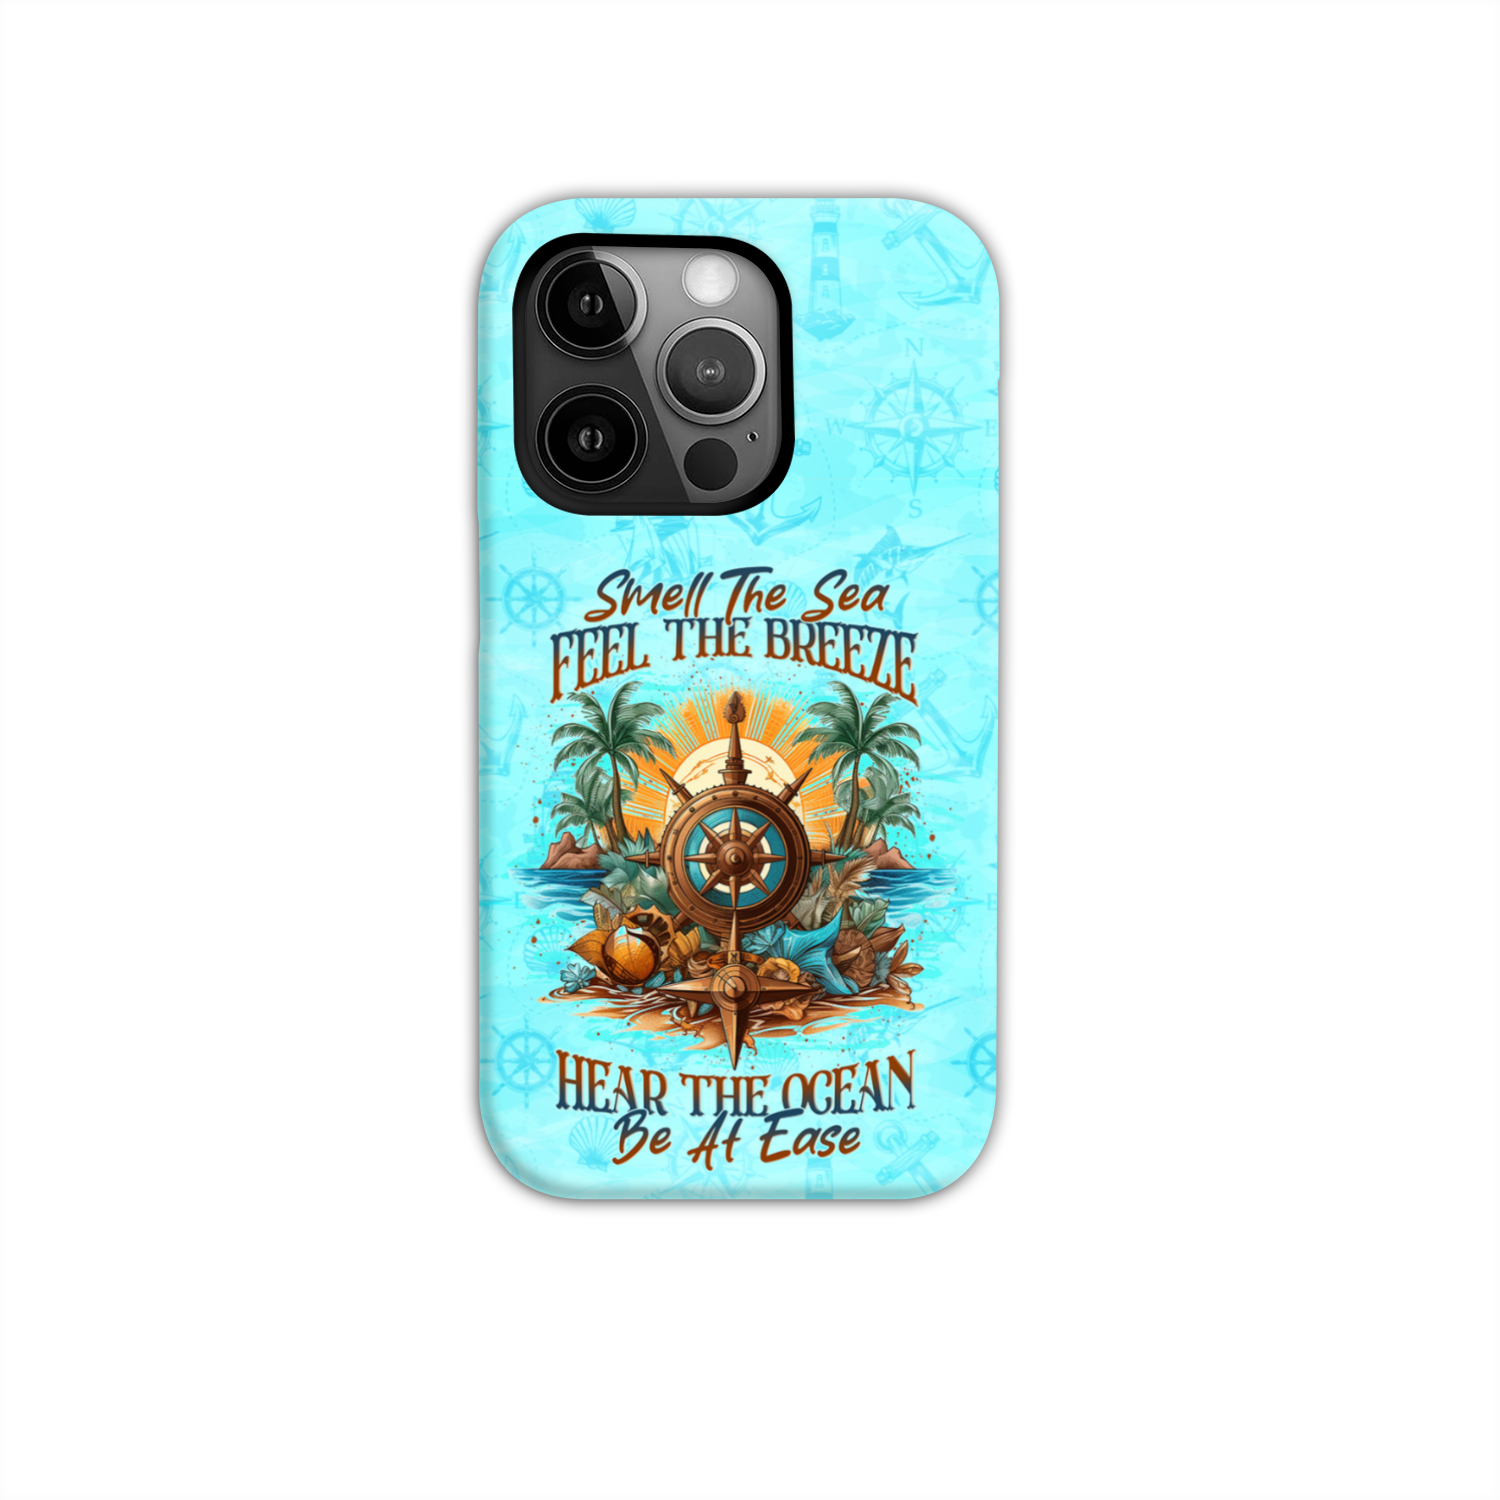 SMELL THE SEA FEEL THE BREEZE PHONE CASE - YHLN0906236